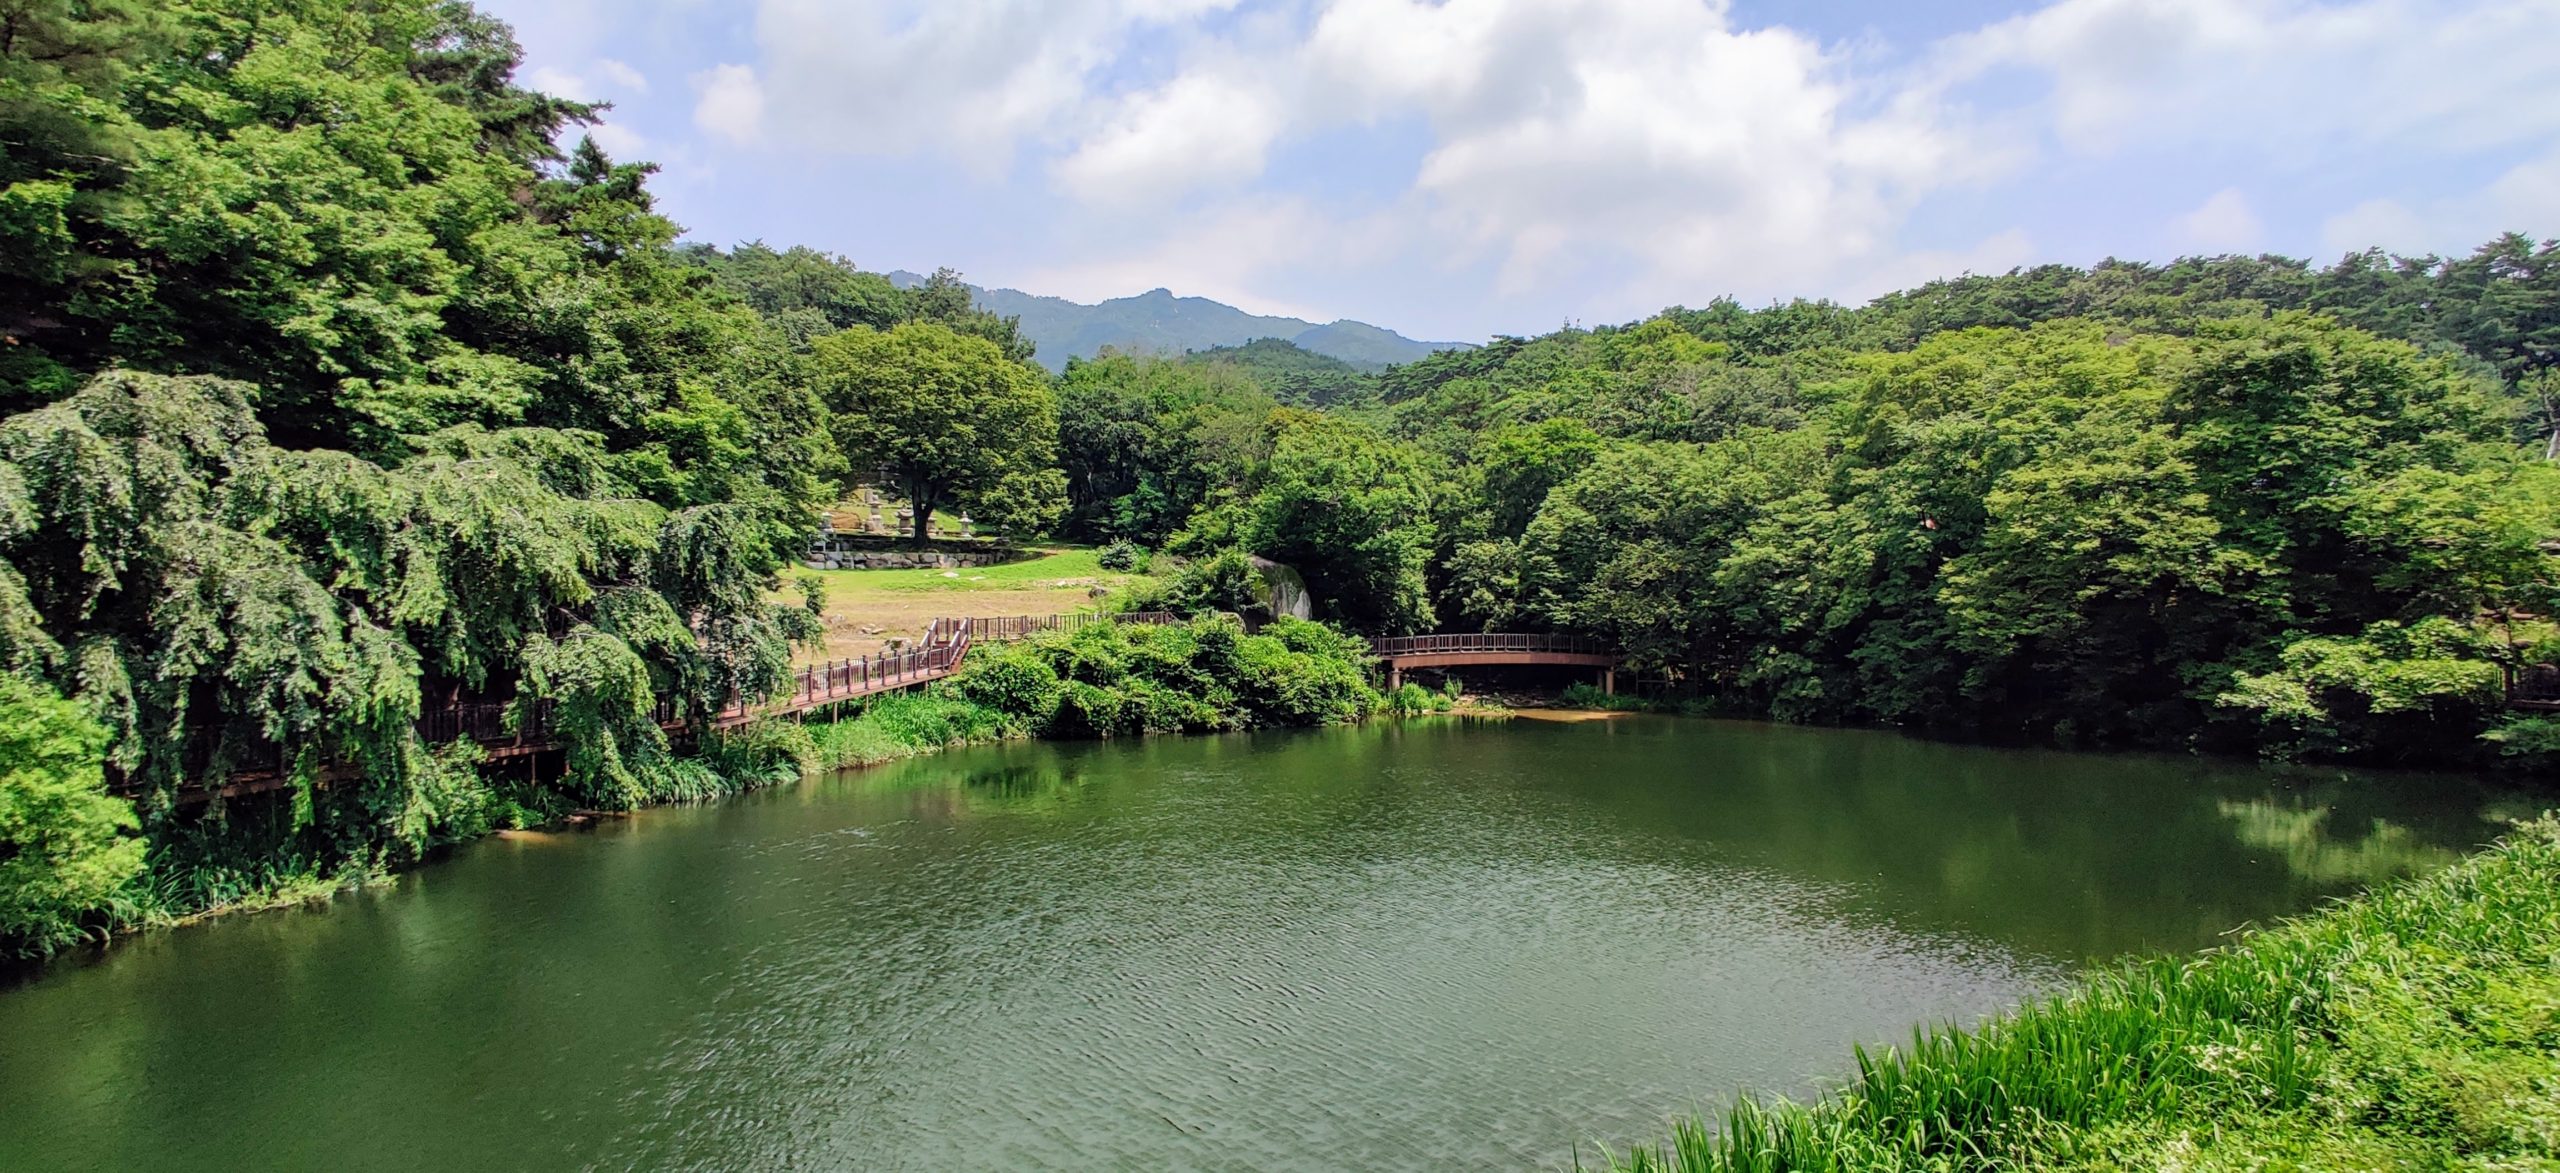 a mountain stream-fed pond in buddhist temple grounds in south korea's Donghwasa temple Daegu